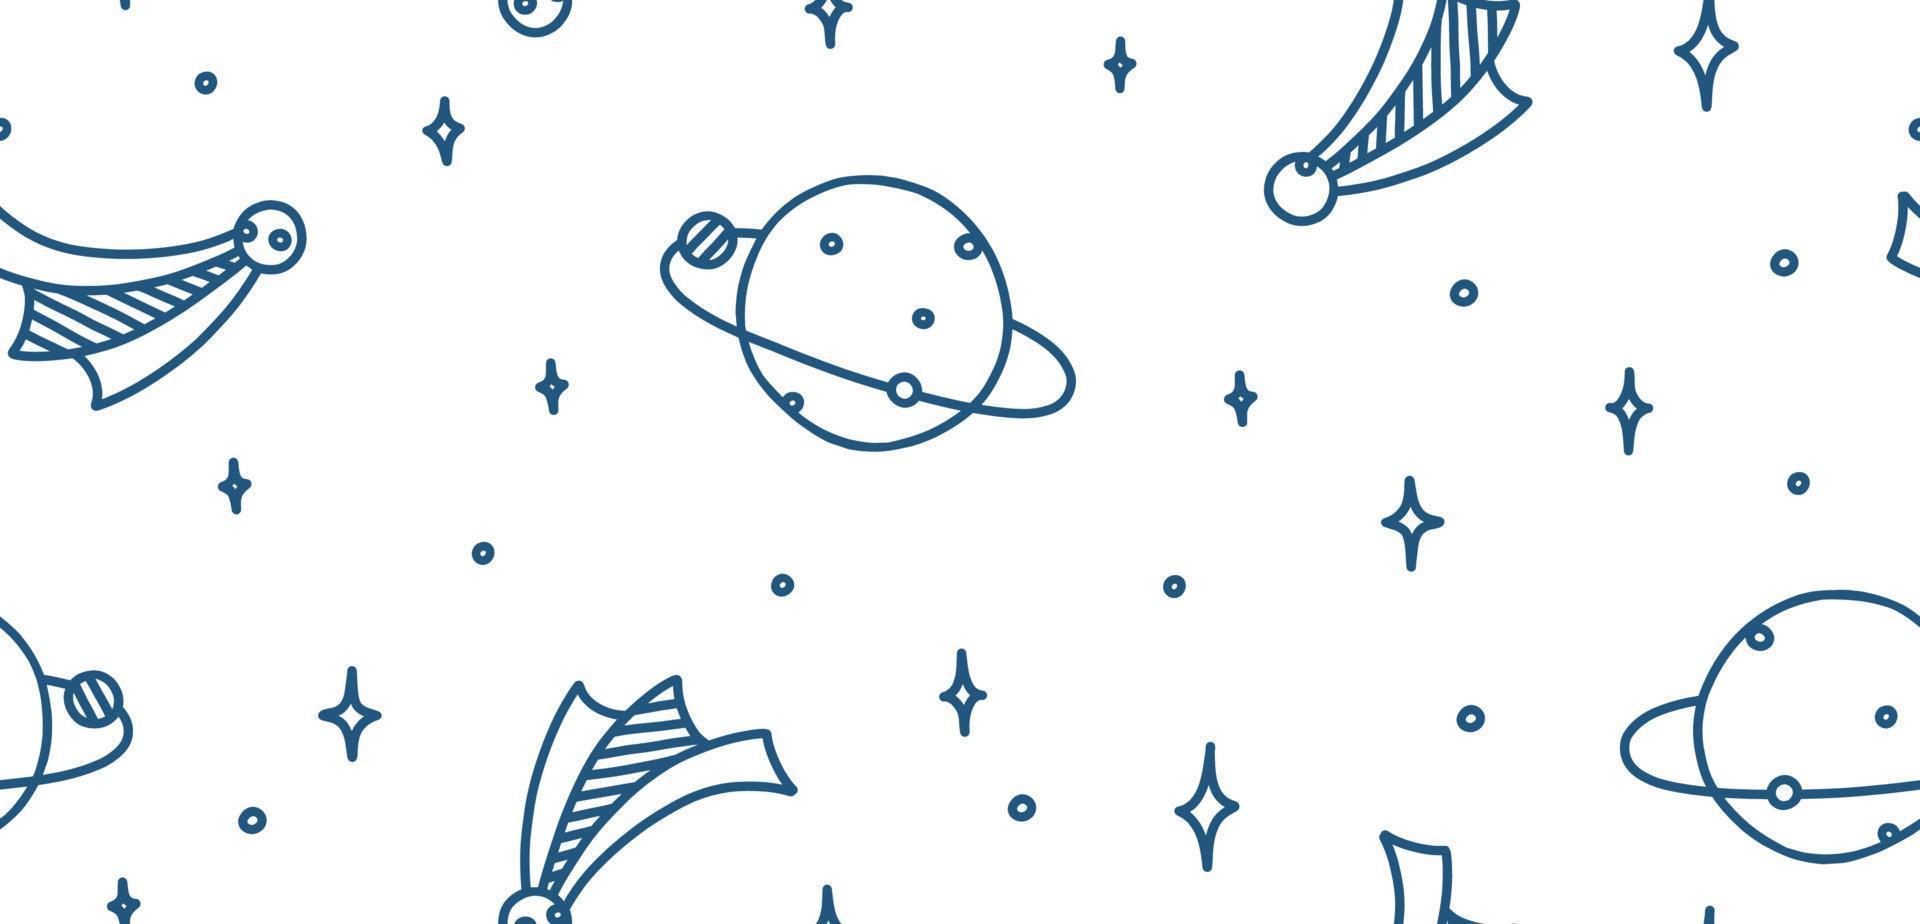 Space doodle with planets, moon, stars and comets. Outer space seamless pattern. Hand drawn vector illustration